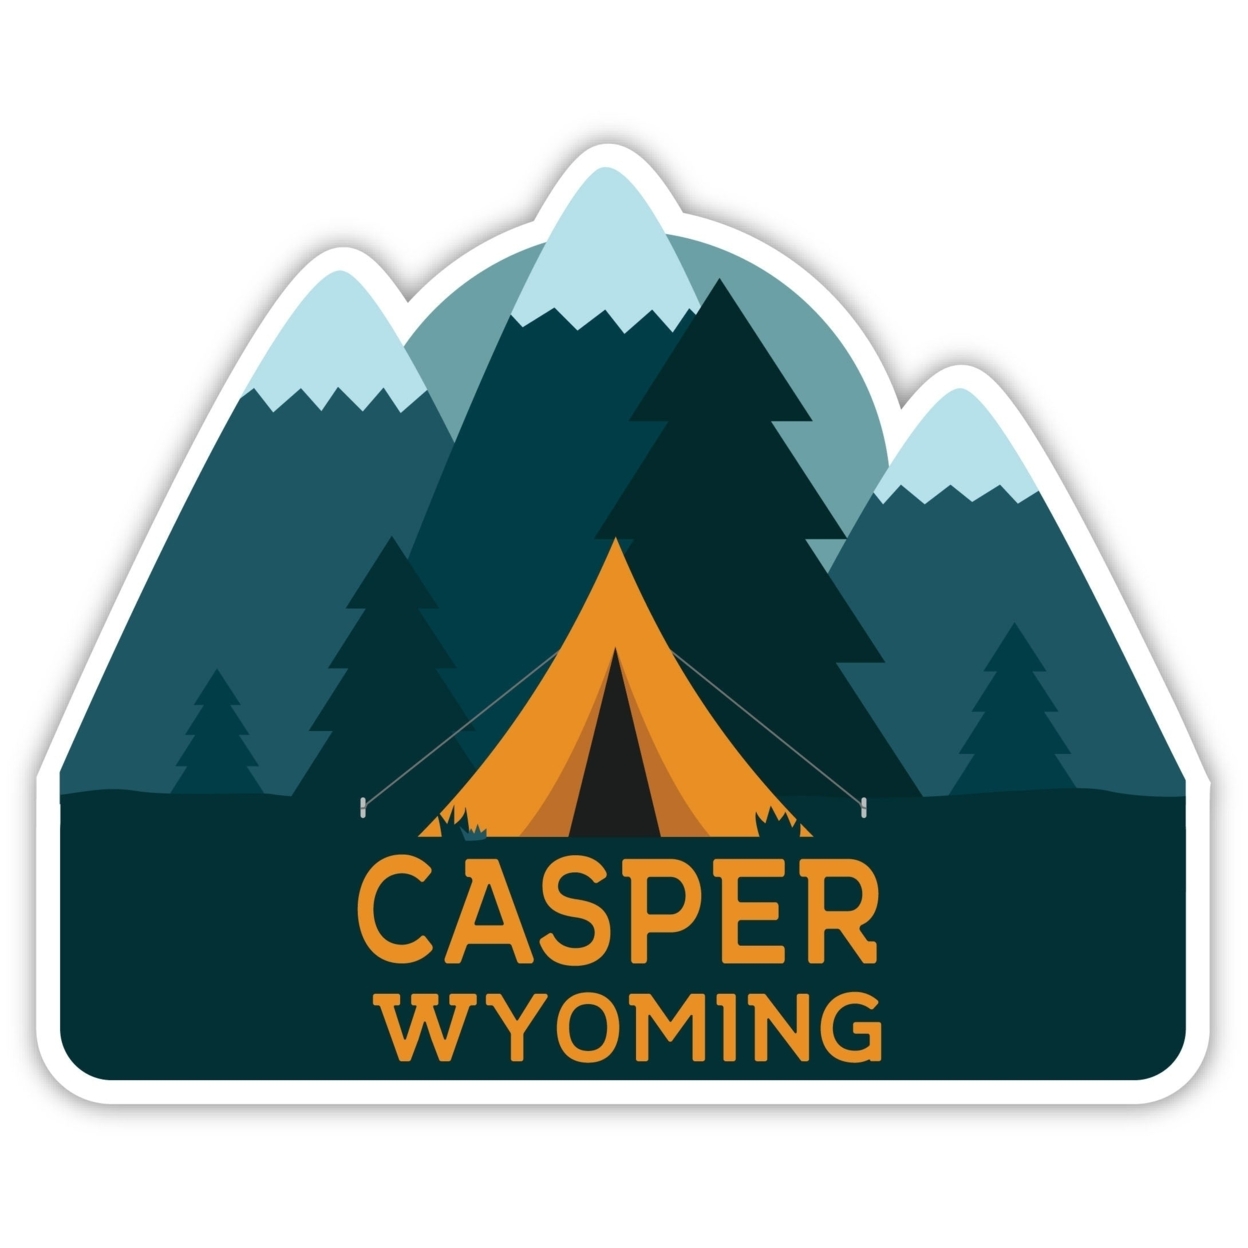 Casper Wyoming Souvenir Decorative Stickers (Choose Theme And Size) - 4-Pack, 12-Inch, Tent